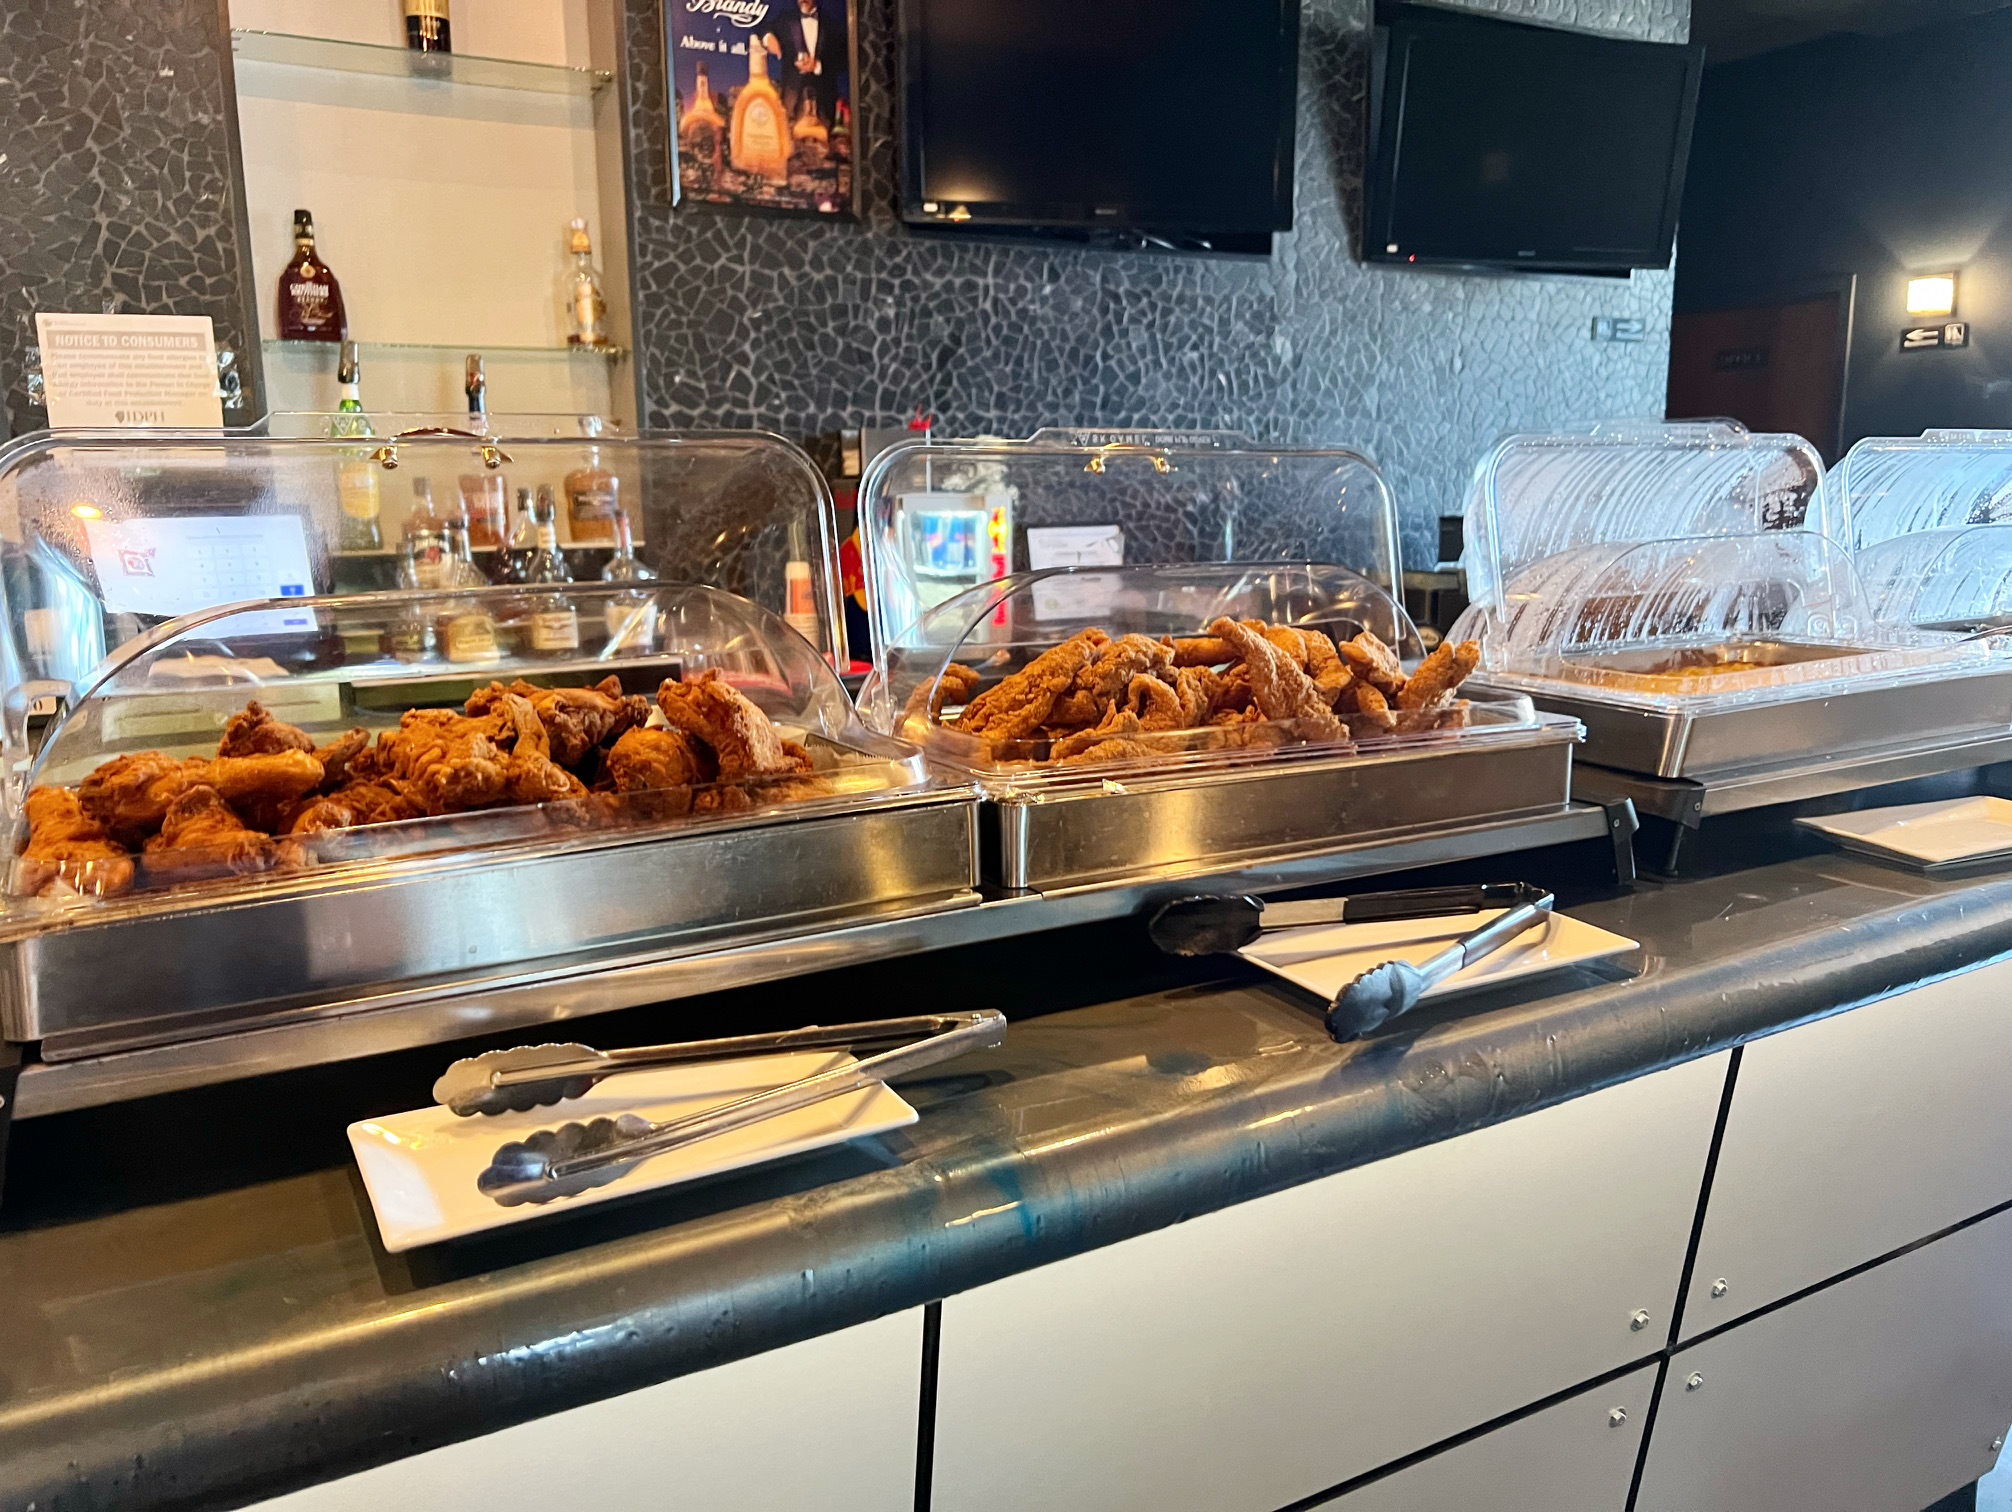 On the buffet at Neil St. Blues, there are large trays of fried chicken, fried catfish, and other dishes in shiny metal containers. Photo by Alyssa Buckley.